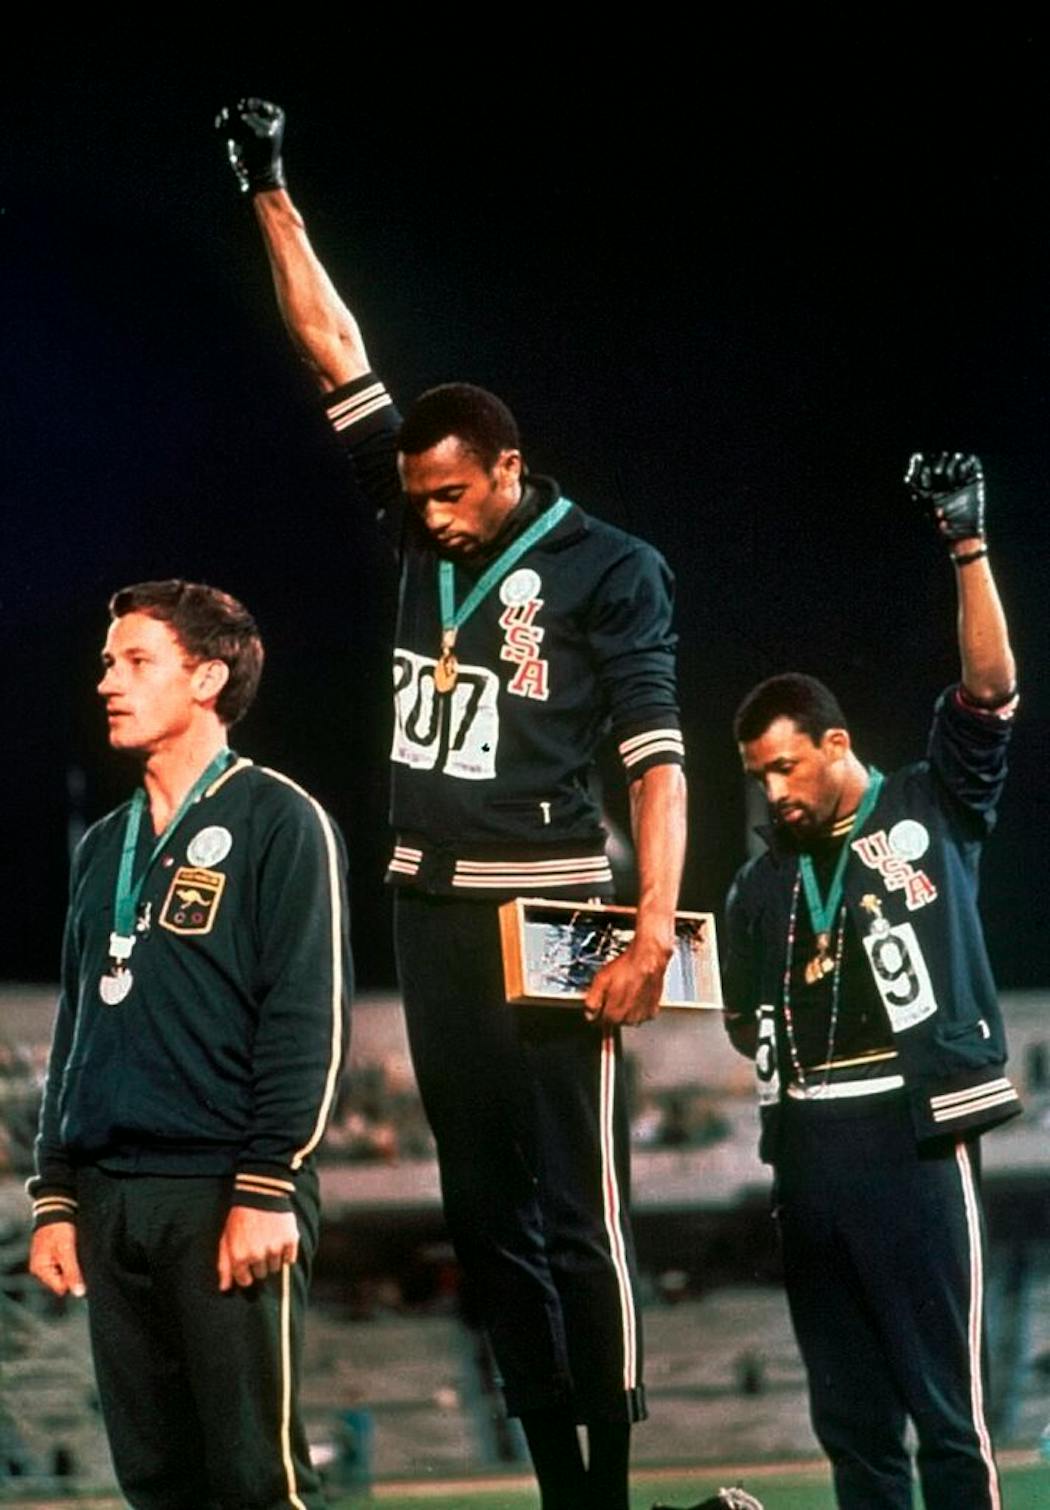 U.S. athletes Tommie Smith, center, and John Carlos protested during the playing of the national anthem after Smith received the gold and Carlos the bronze for the 200-meter run at the Summer Olympic Games in Mexico City on Oct. 16, 1968. Australian silver medalist Peter Norman is at left.